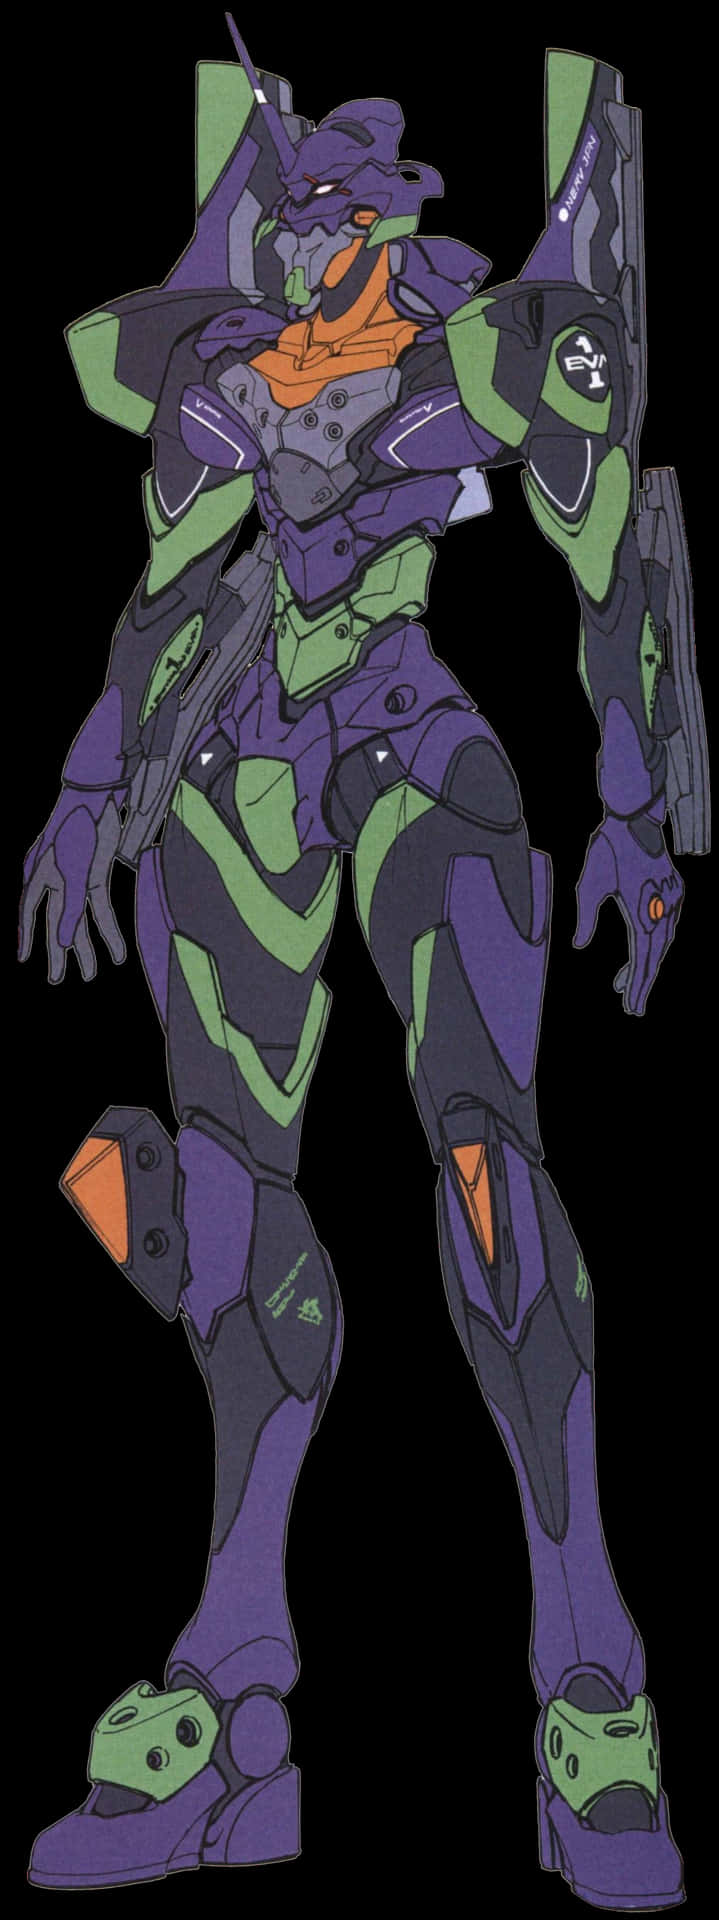 Eva-03 stands tall in action Wallpaper